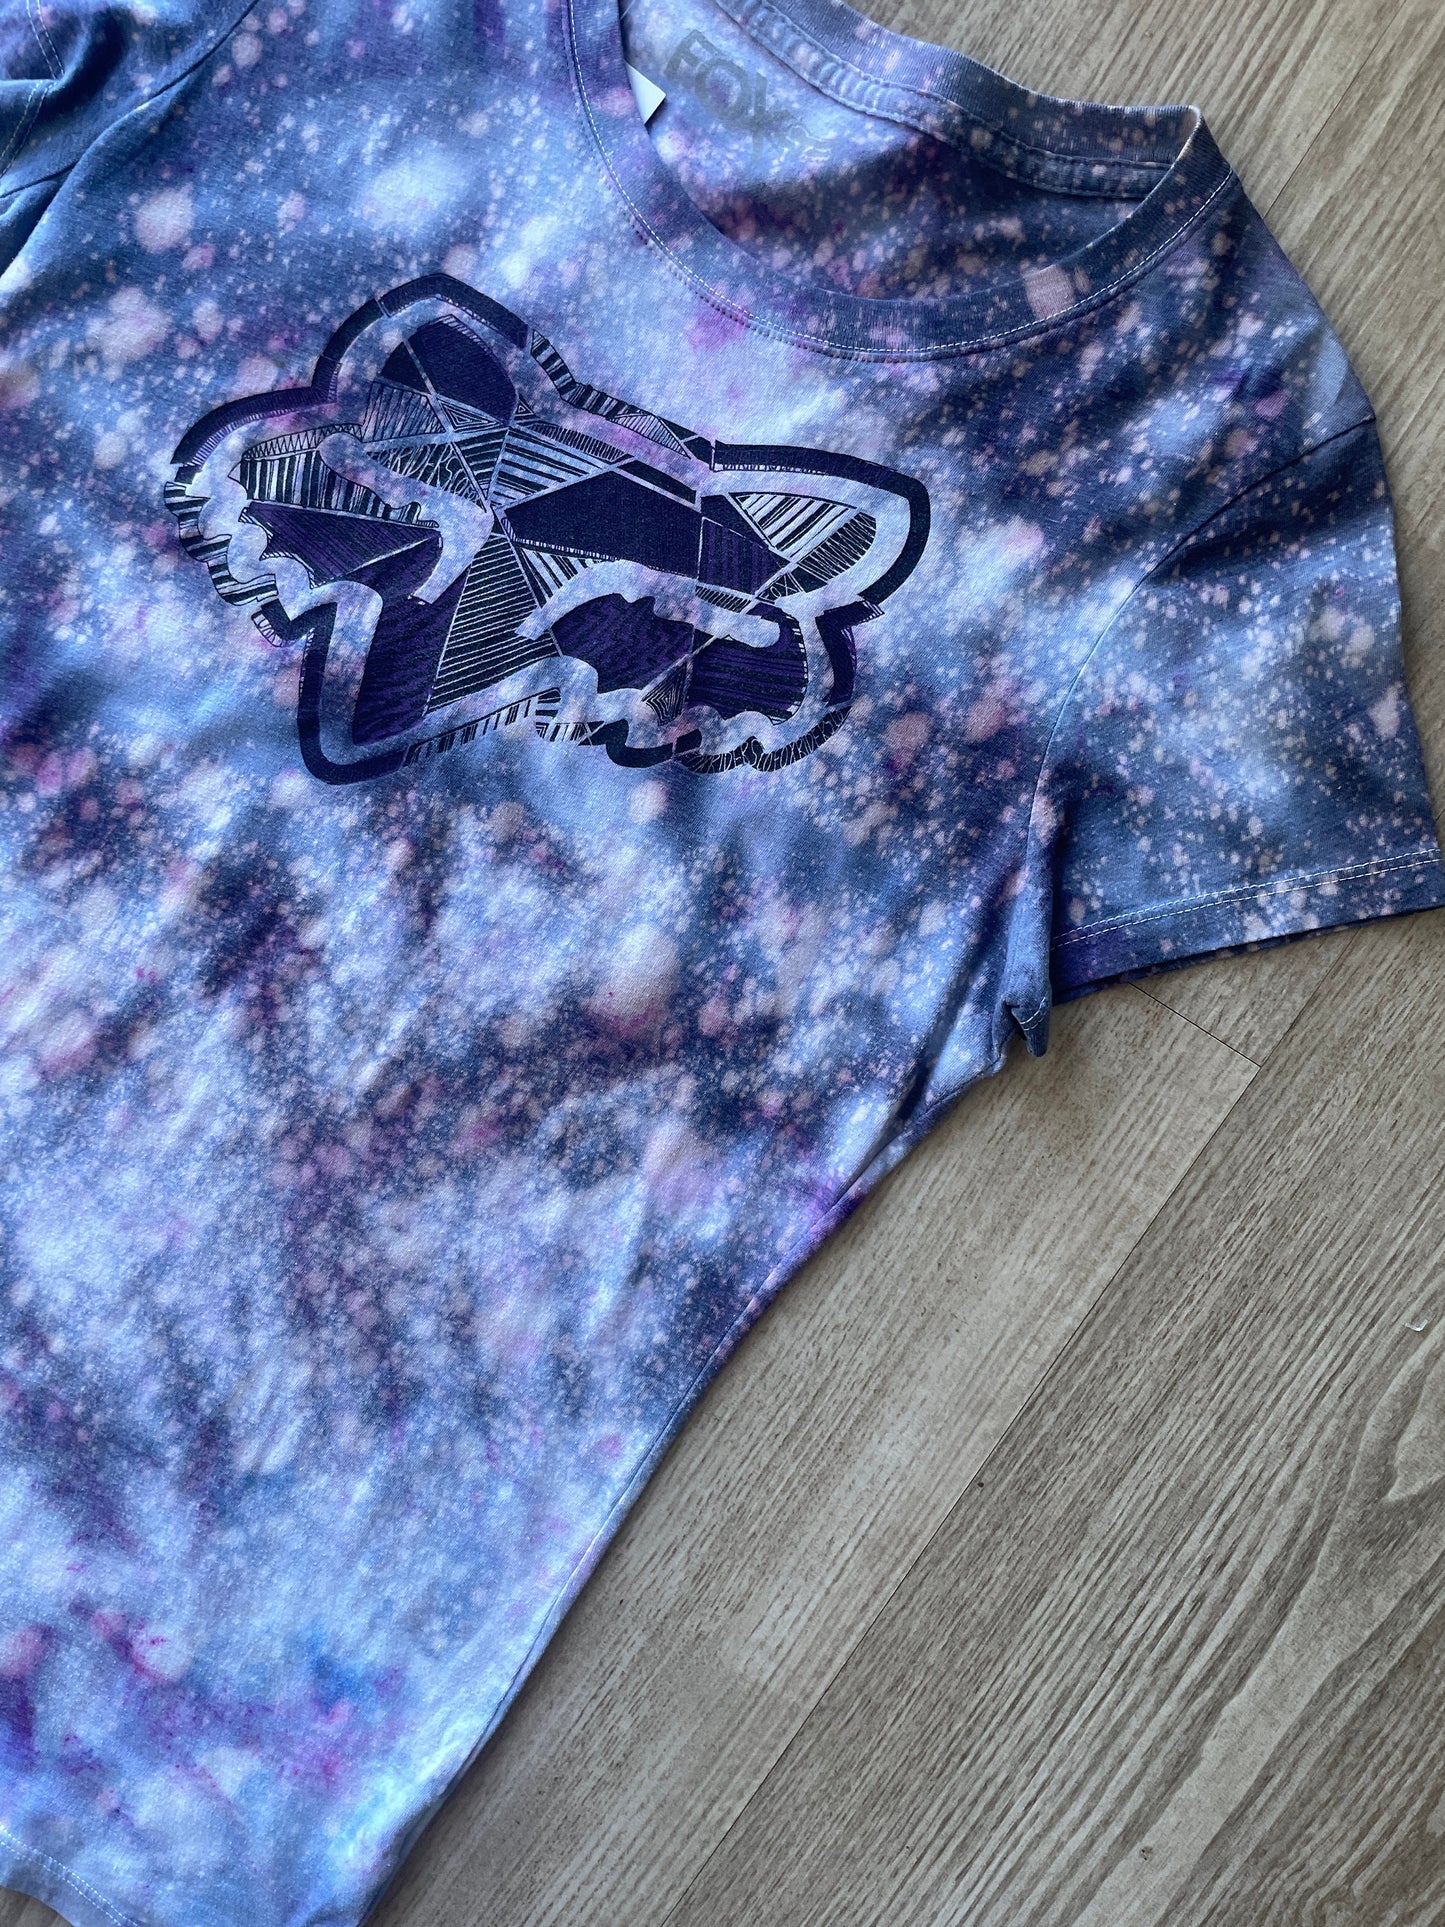 LARGE Women's Fox Racing Handmade Tie Dye Short Sleeve T-Shirt | One-Of-a-Kind Upcycled Gray and Purple Ice Dye Crumpled Top